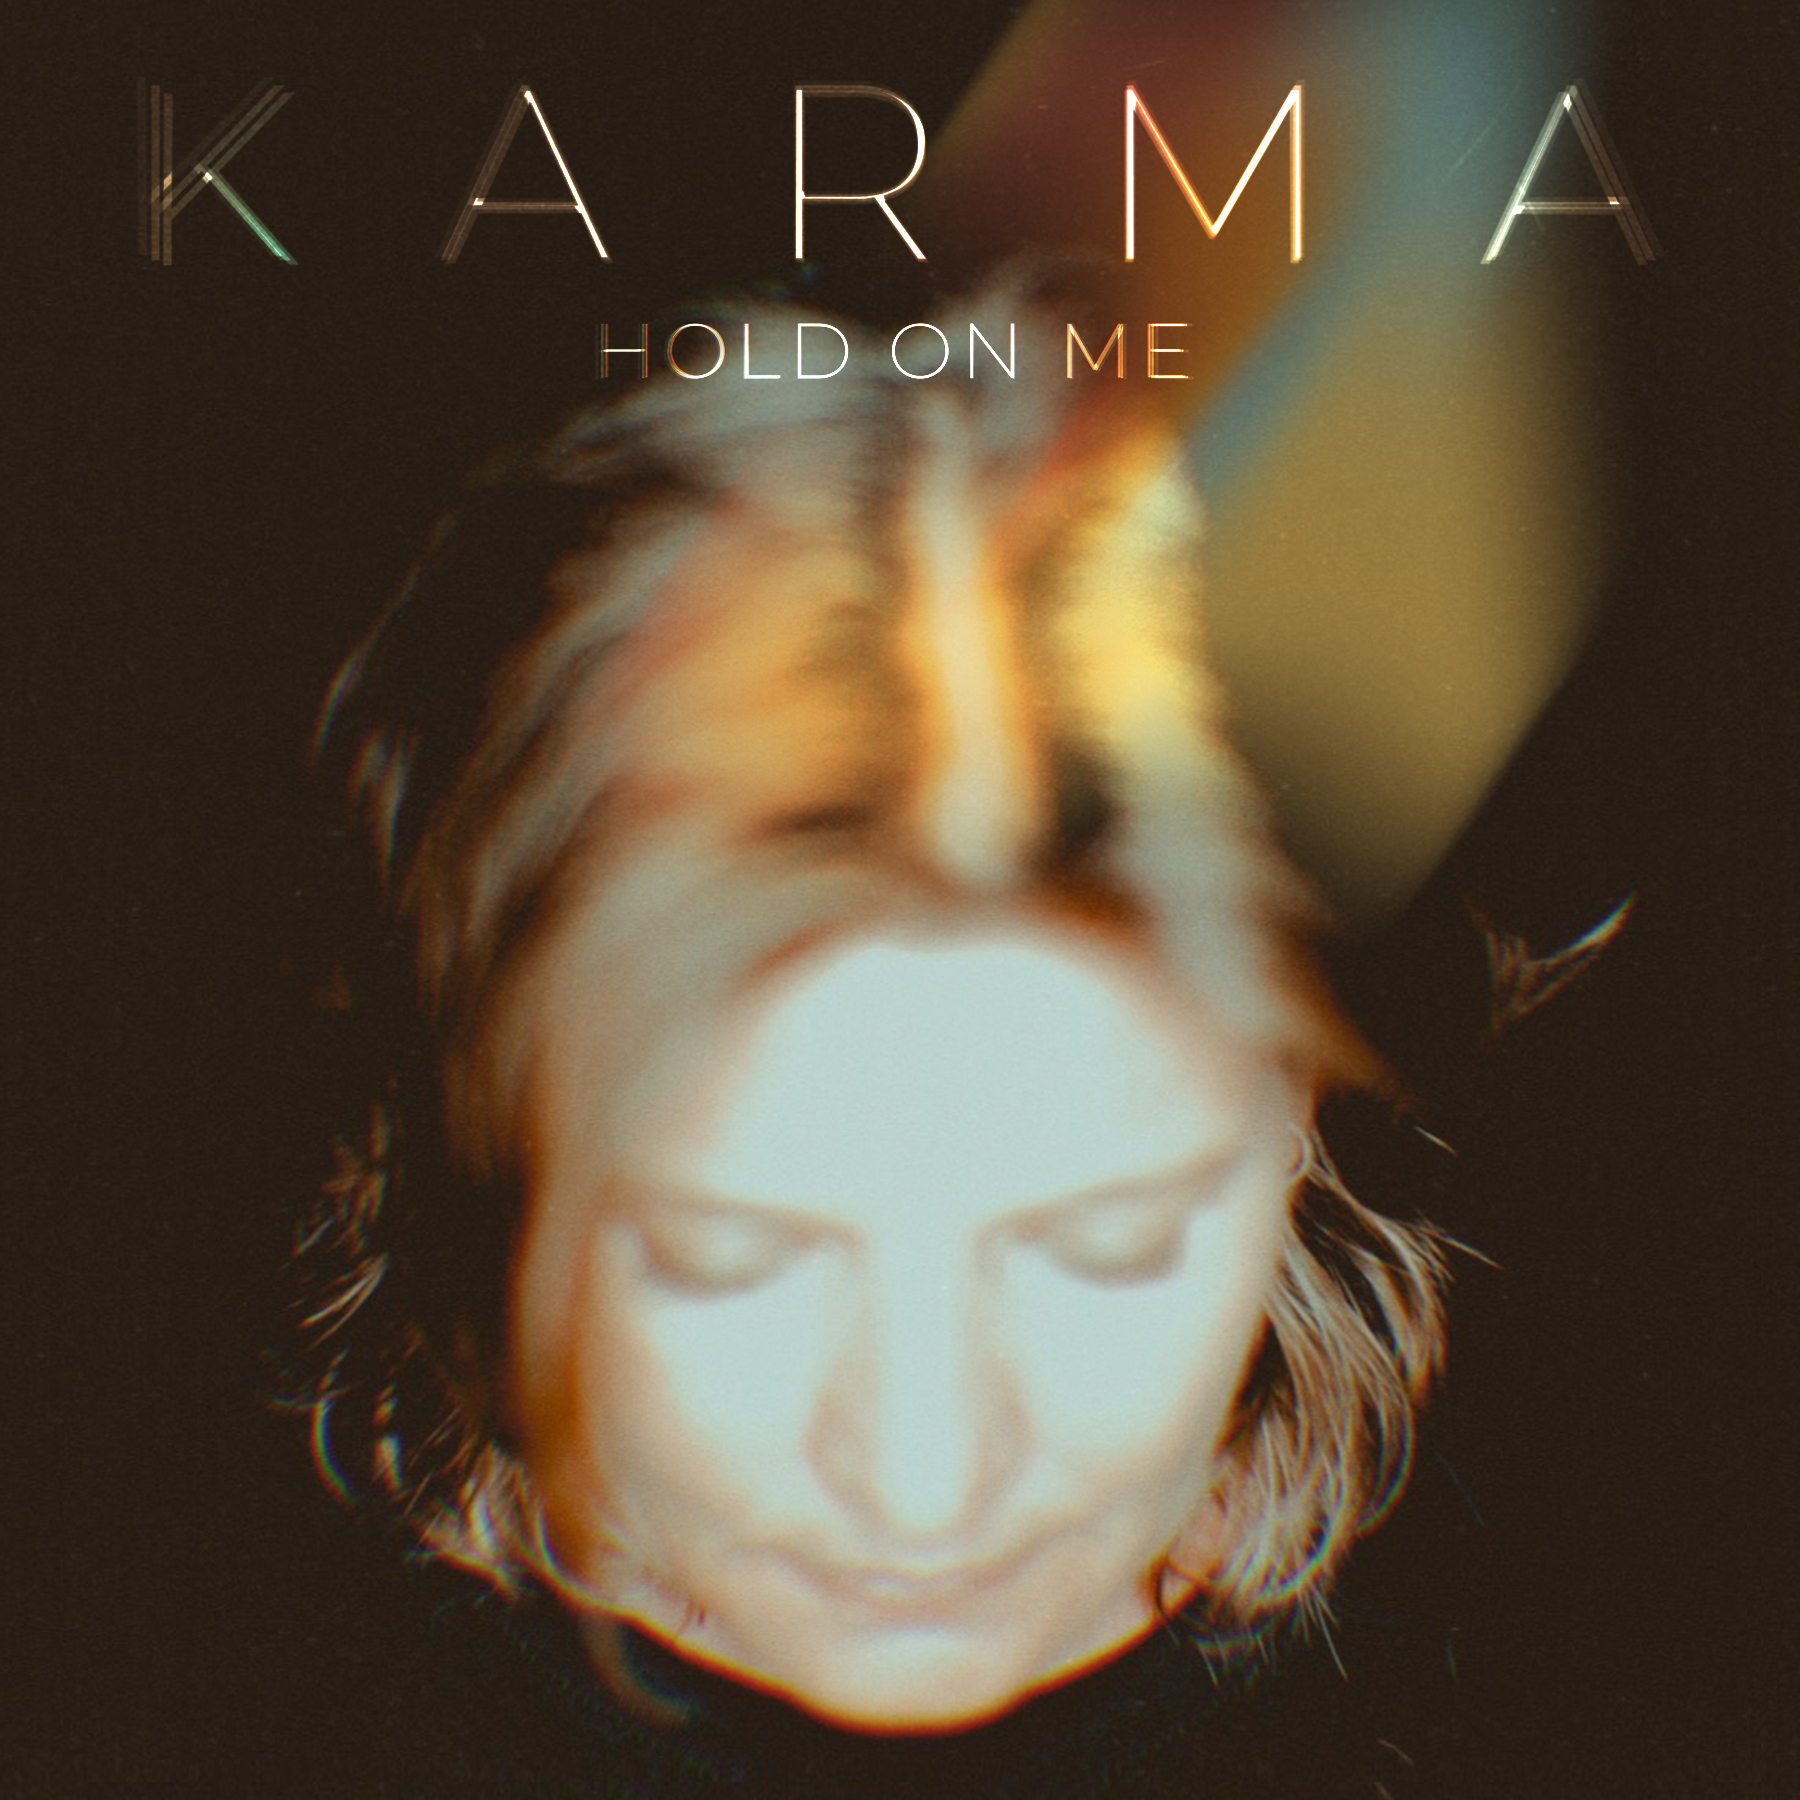 Karma’s First New Single In Ten Years, The Tragically beautiful Hold On Me – Now Live on The Bafana FM Playlist.